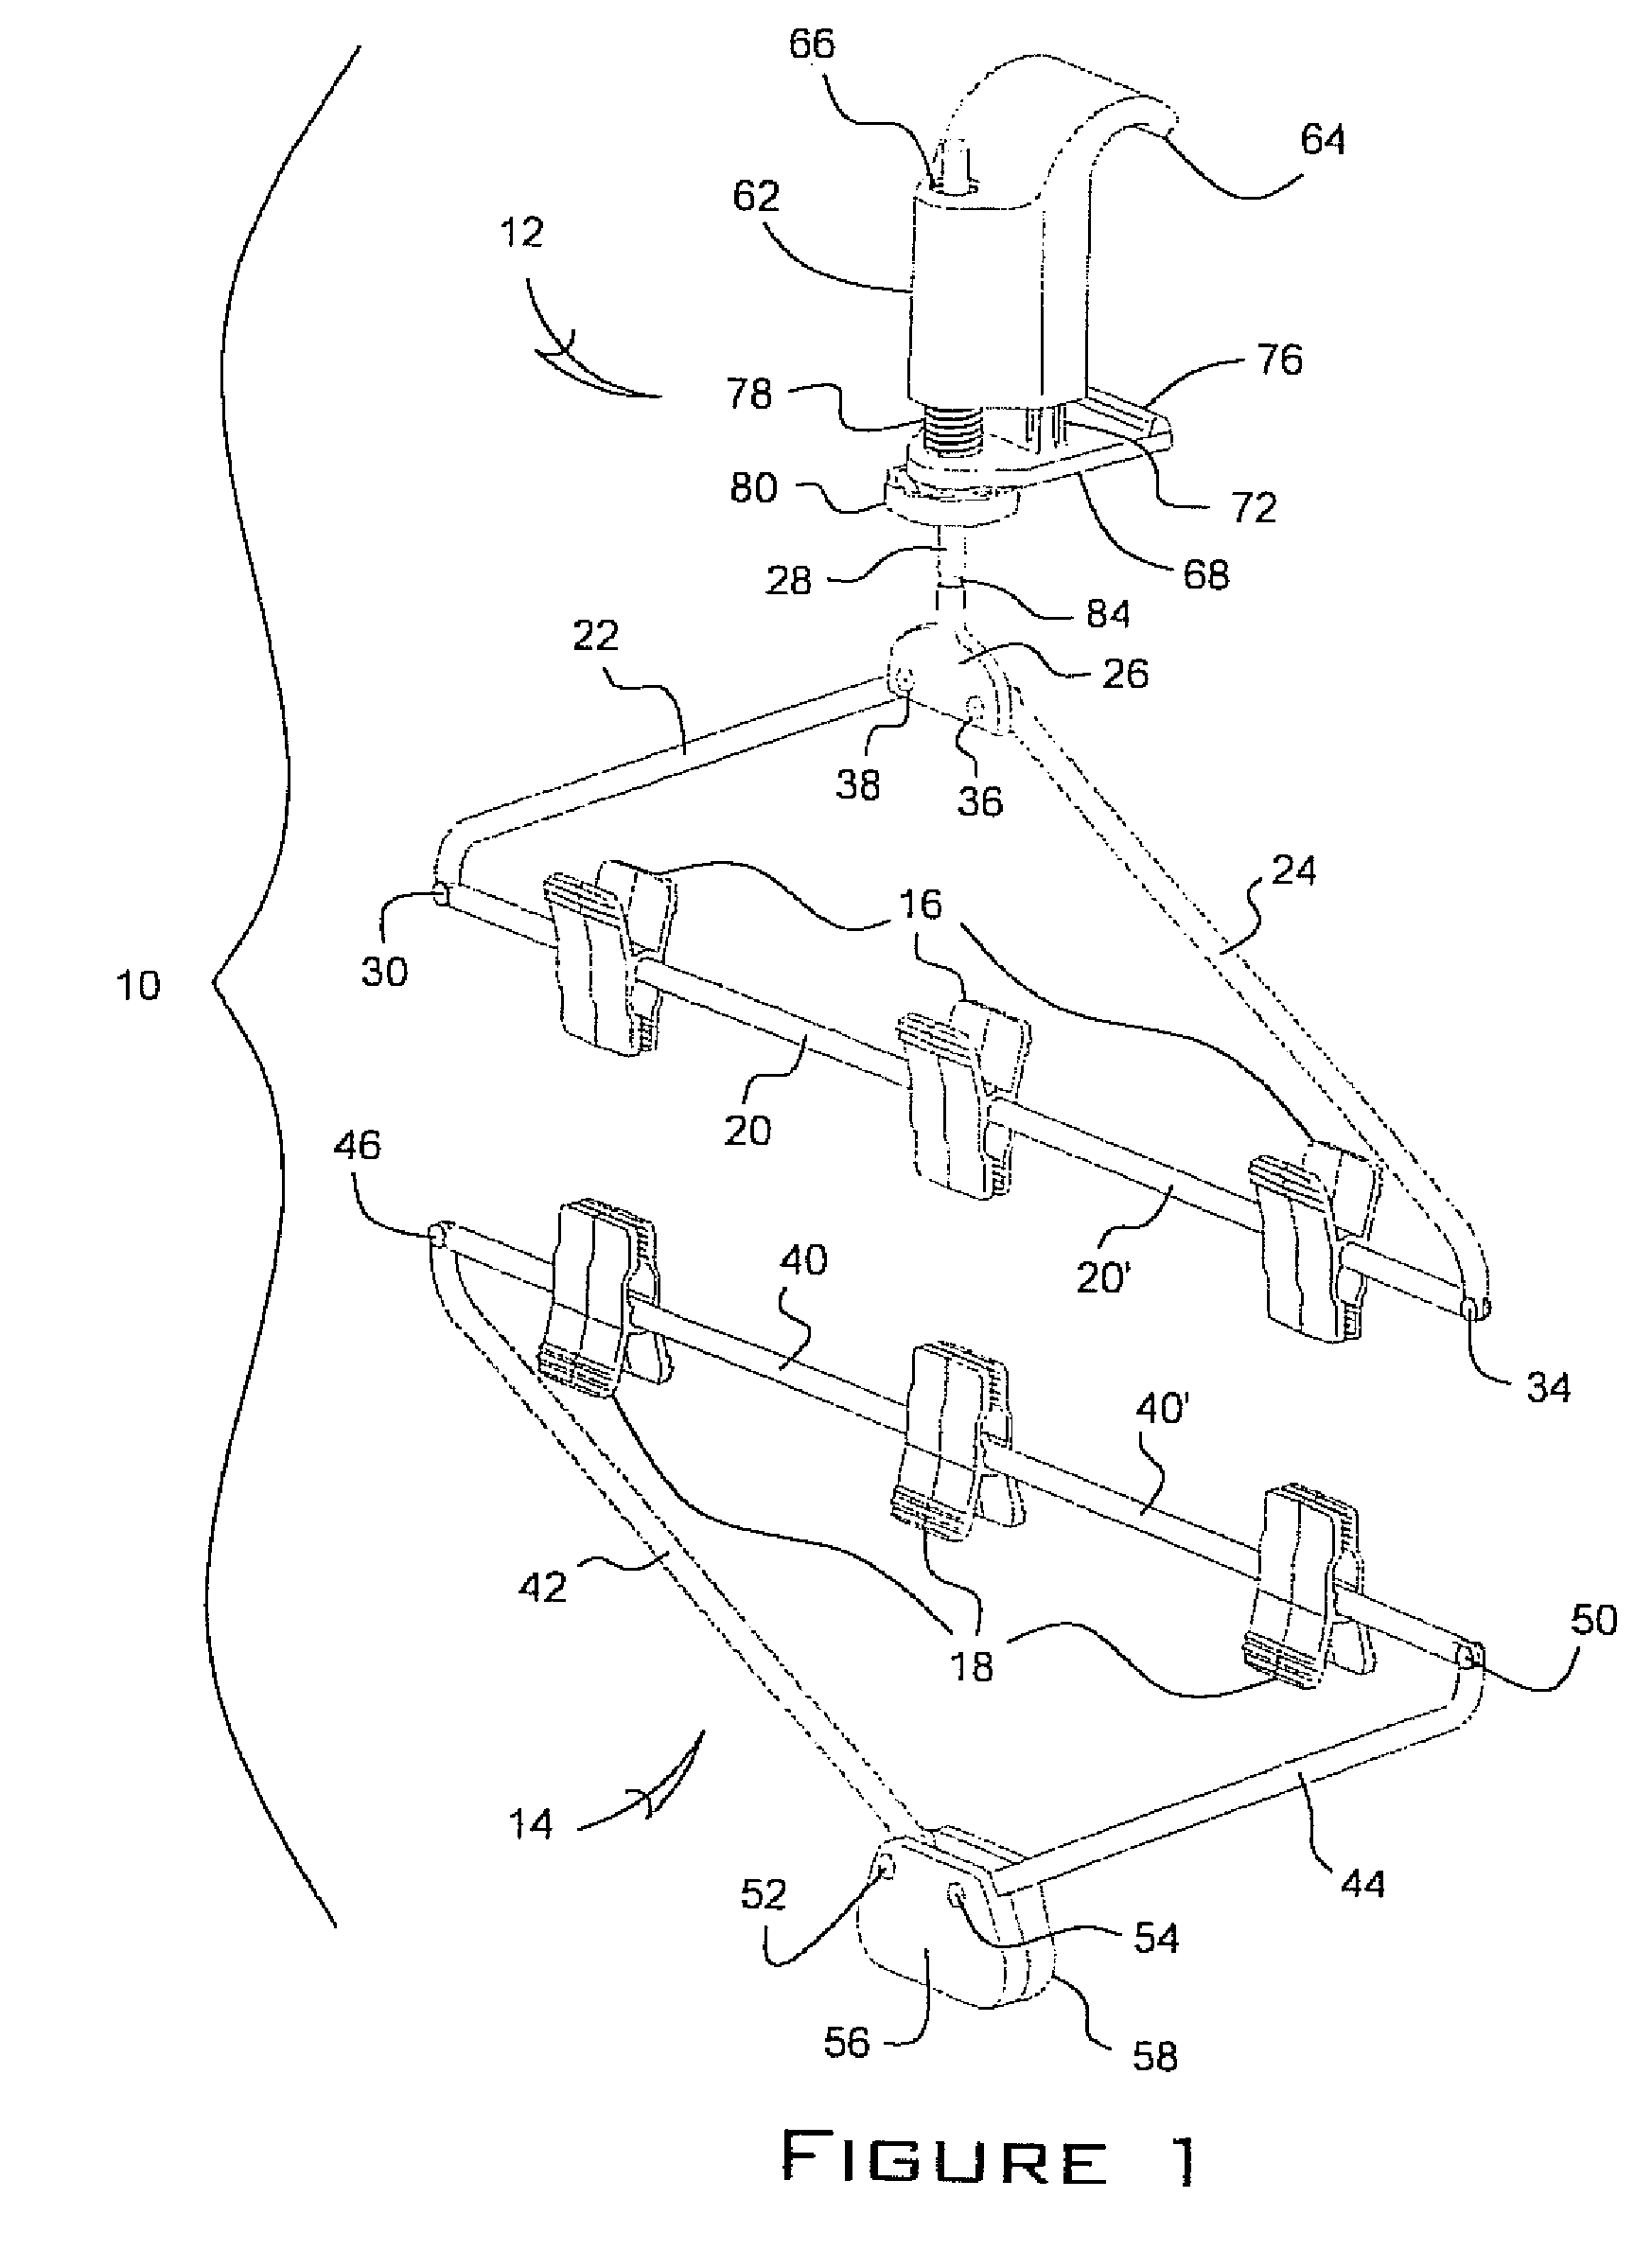 Combination bracket and garment hanger system and assembly mountable to an overhead trim piece associated with a doorway such as for rotatably supporting a garment during steam cleaning